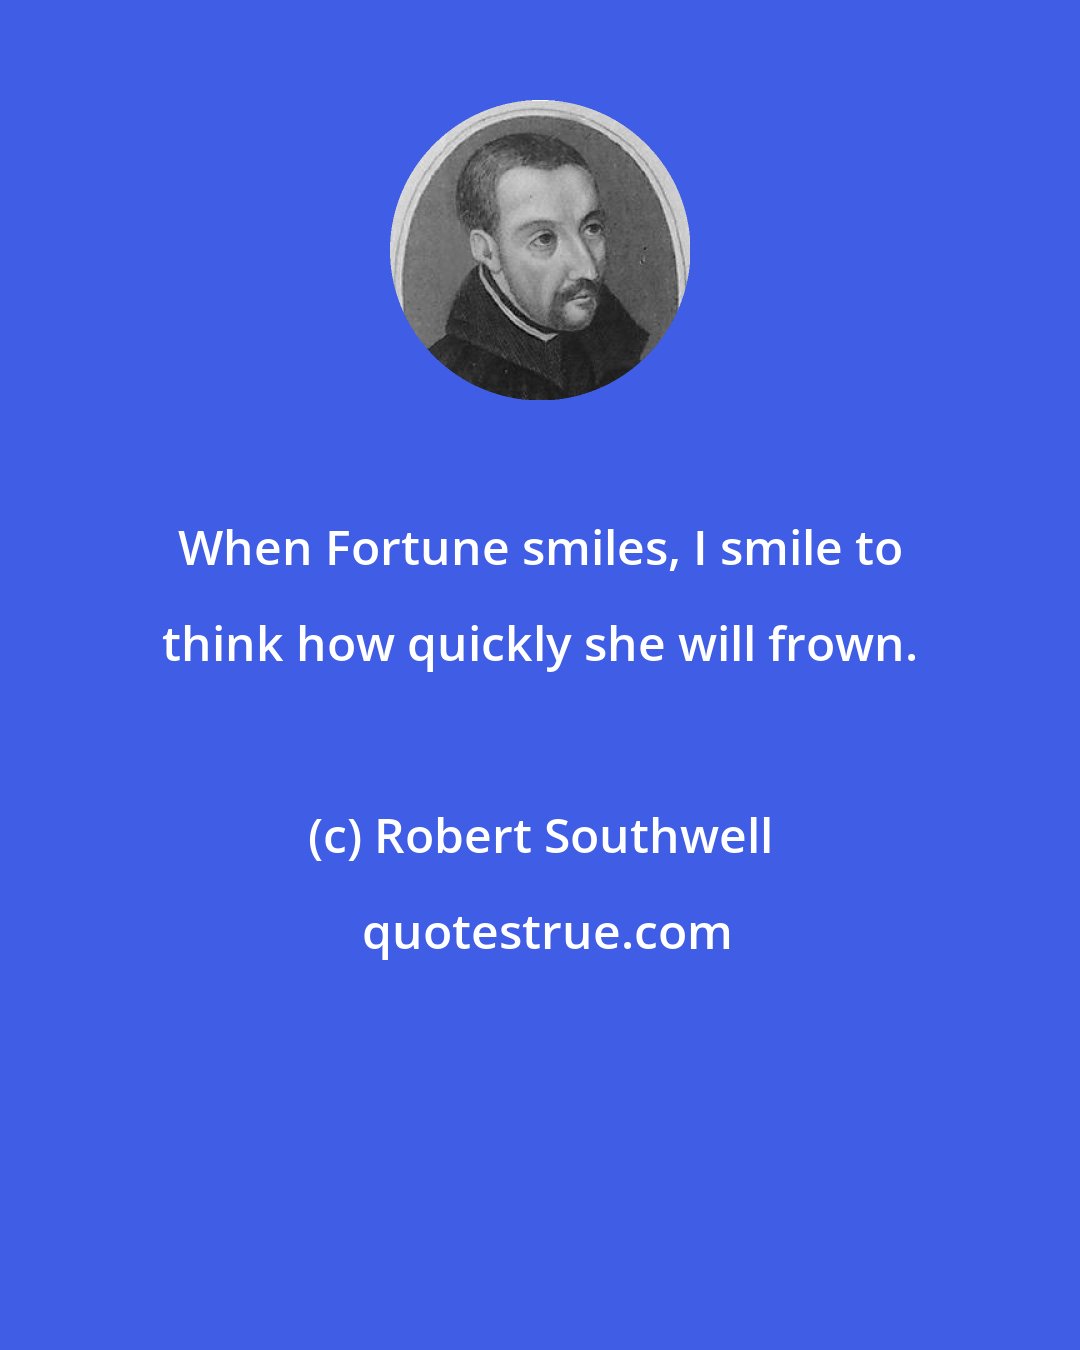 Robert Southwell: When Fortune smiles, I smile to think how quickly she will frown.